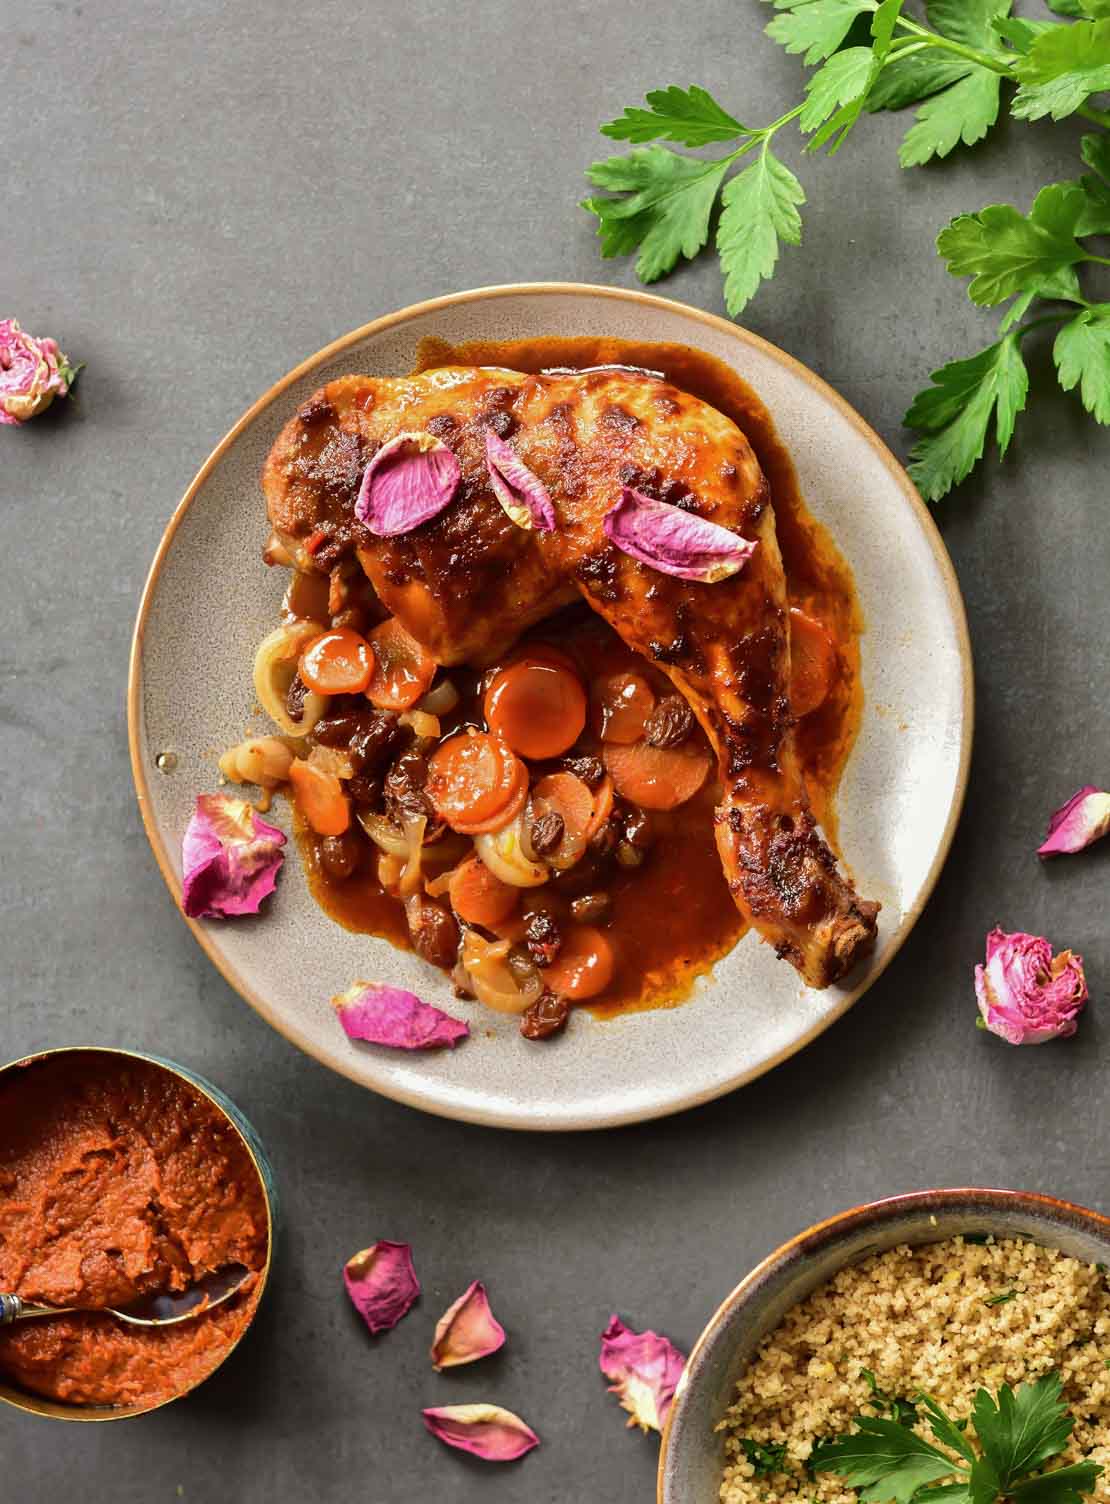 Harissa chicken with rose water sauce and lemon couscous